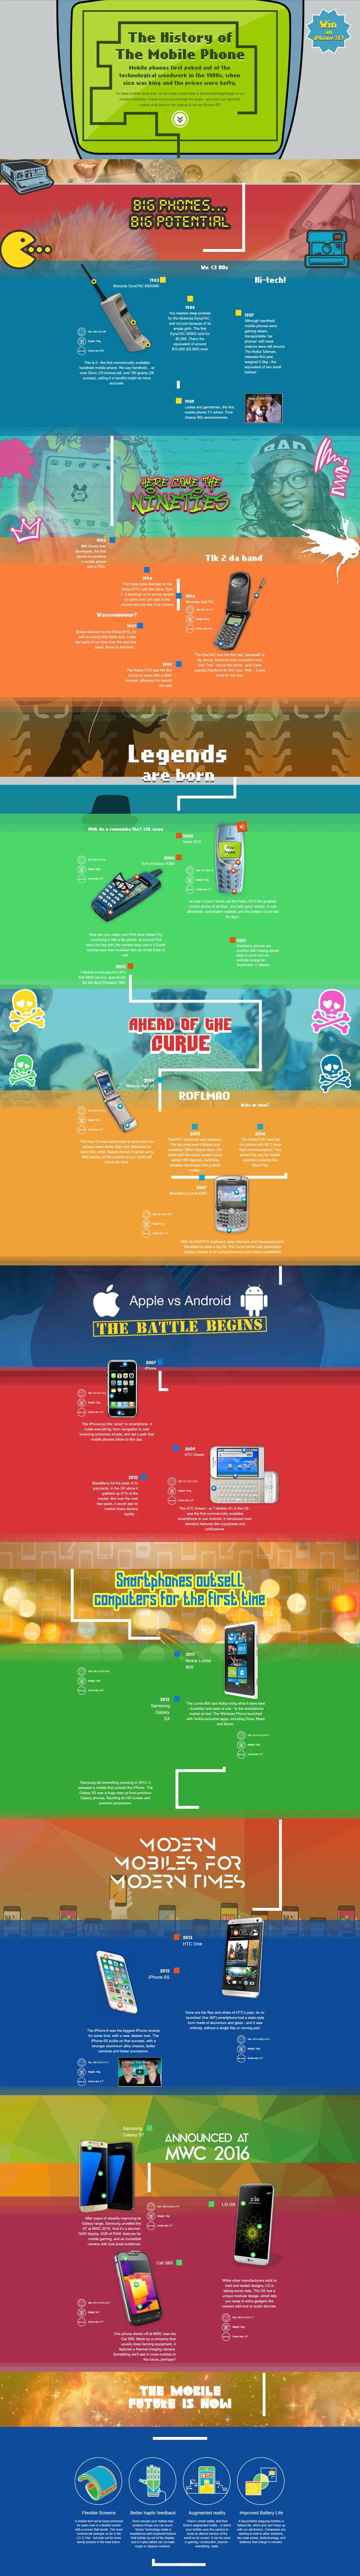 history of smartphones since 1980 infographic_mini